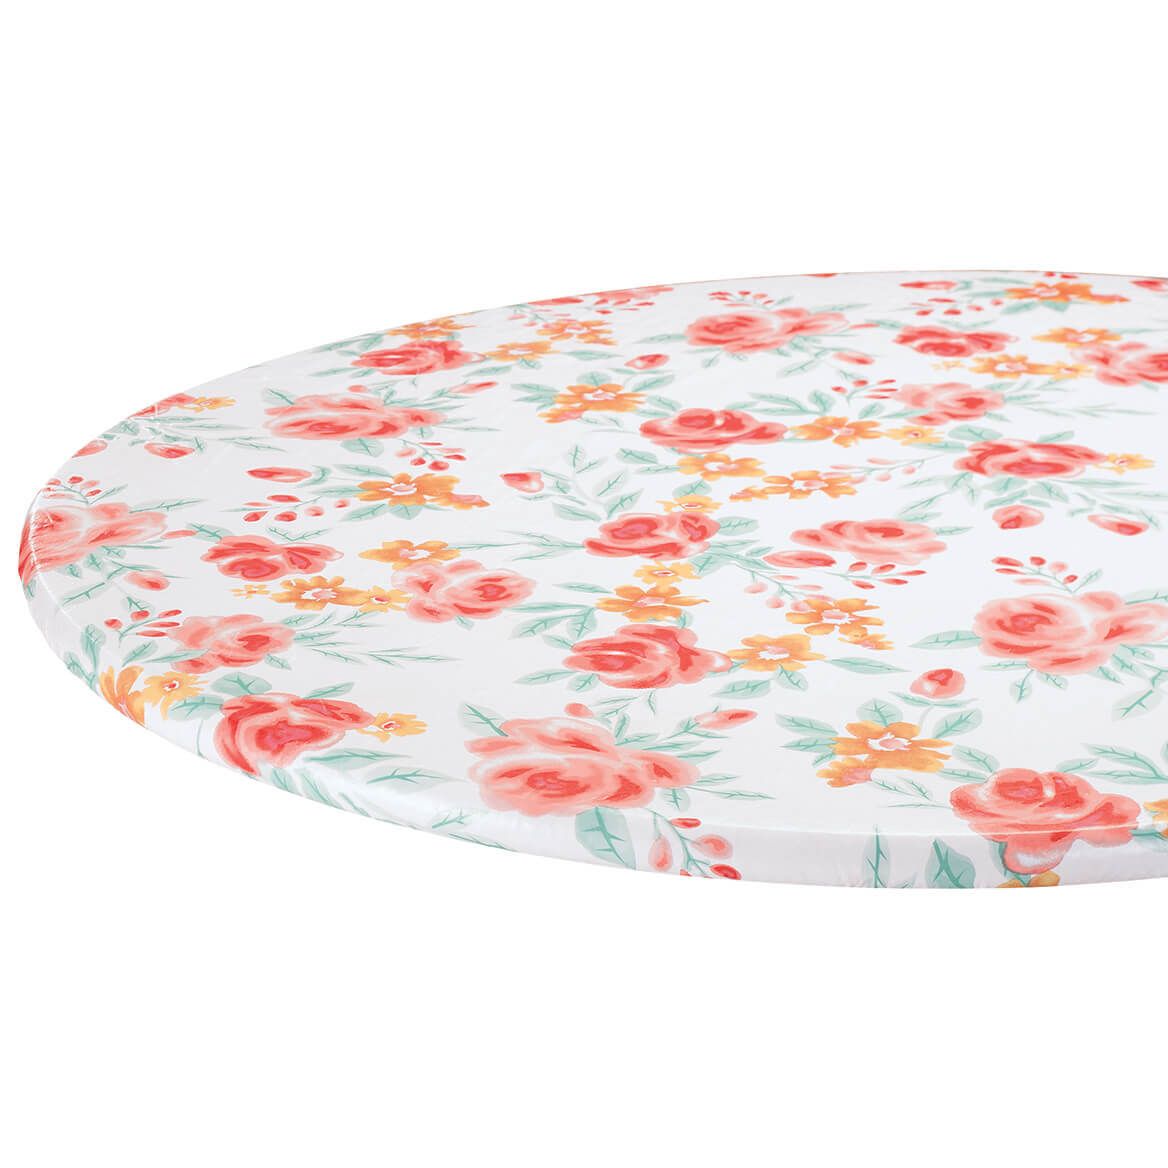 Watercolor Vinyl Elasticized Table Cover by Home-Style Kitchen™ + '-' + 366971